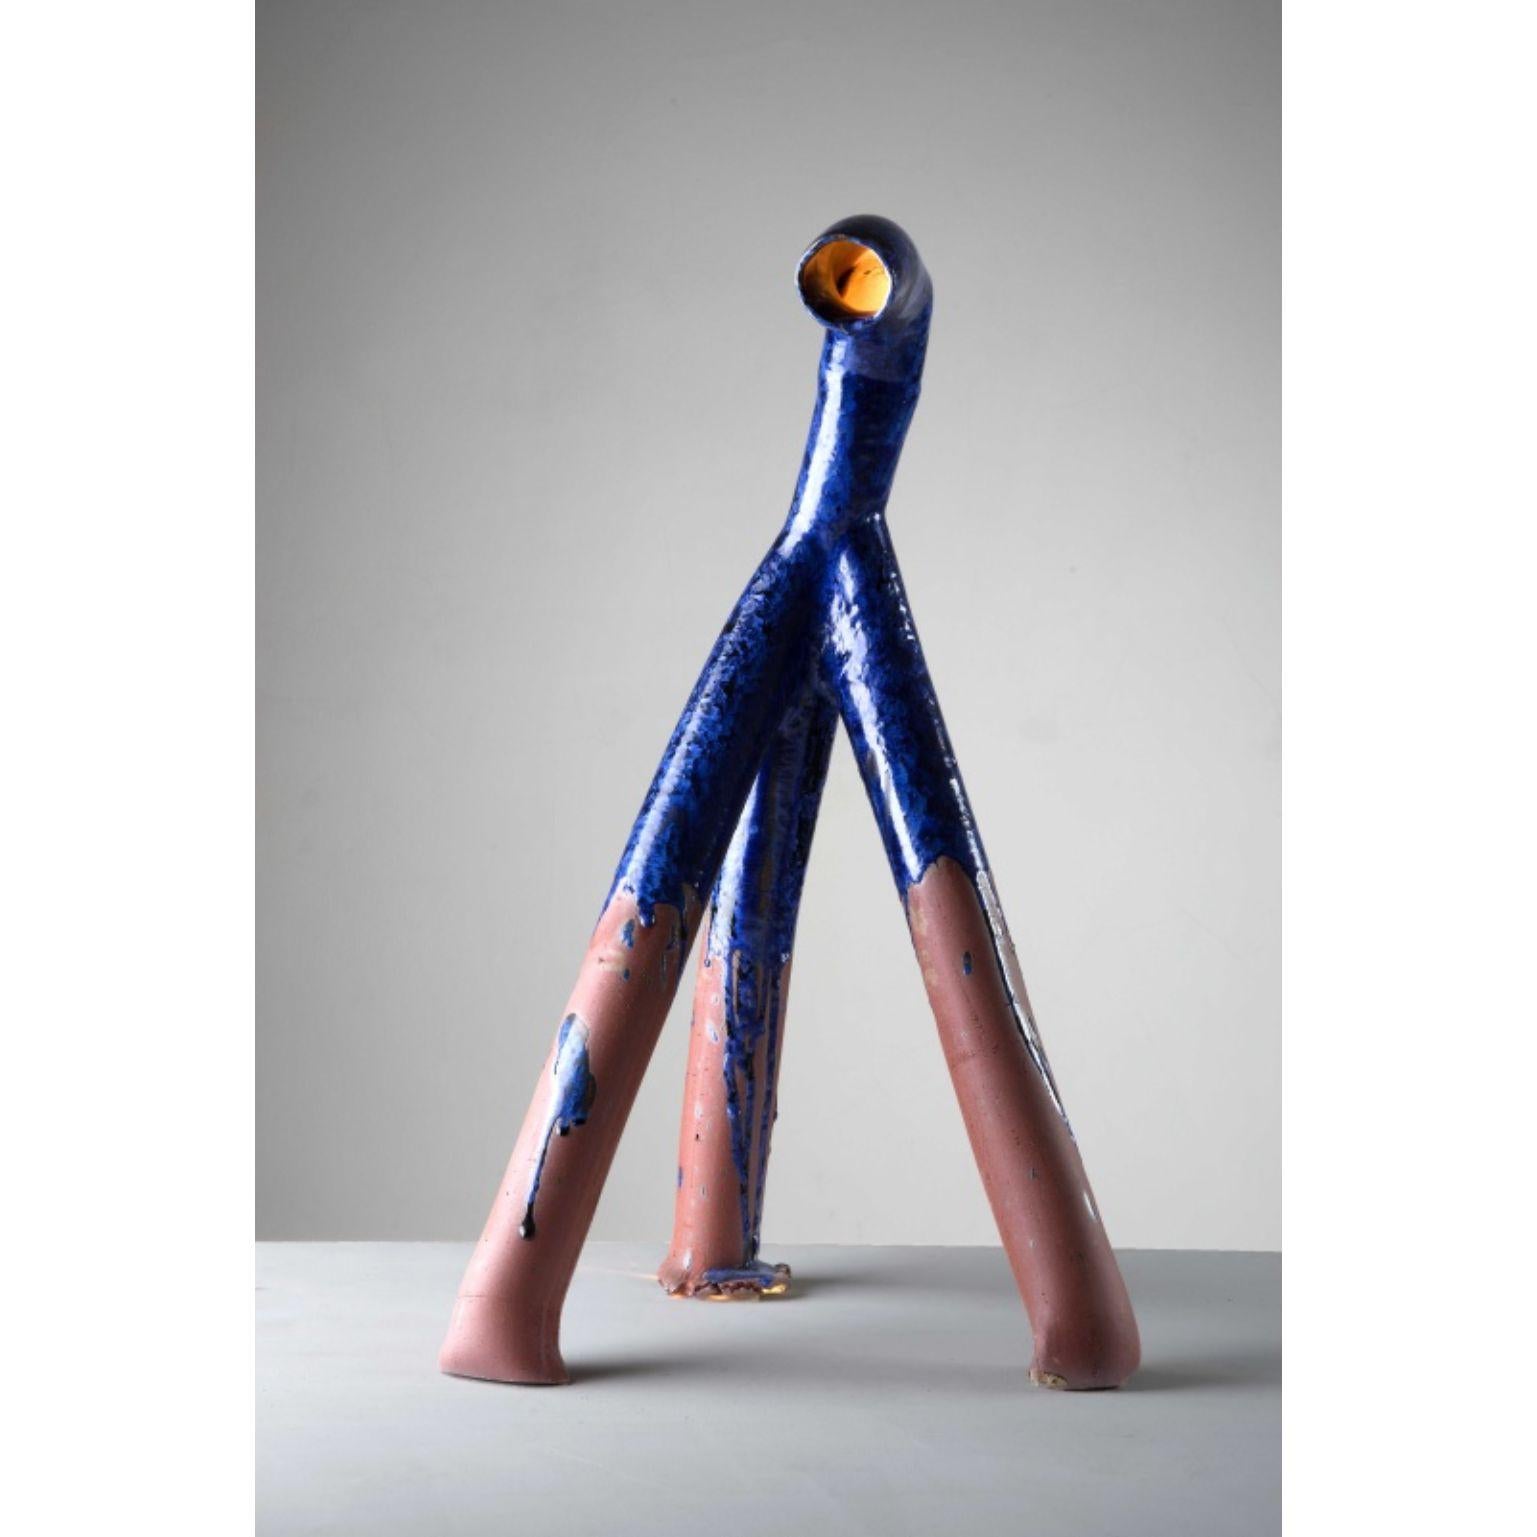 Big blue lamp by Milan Pekar
Dimensions: D x H80 cm
Materials: Glaze, Clay

Hand-made in the Czech Republic

All our lamps can be wired according to each country. If sold to the USA it will be wired for the USA for instance.

Established own